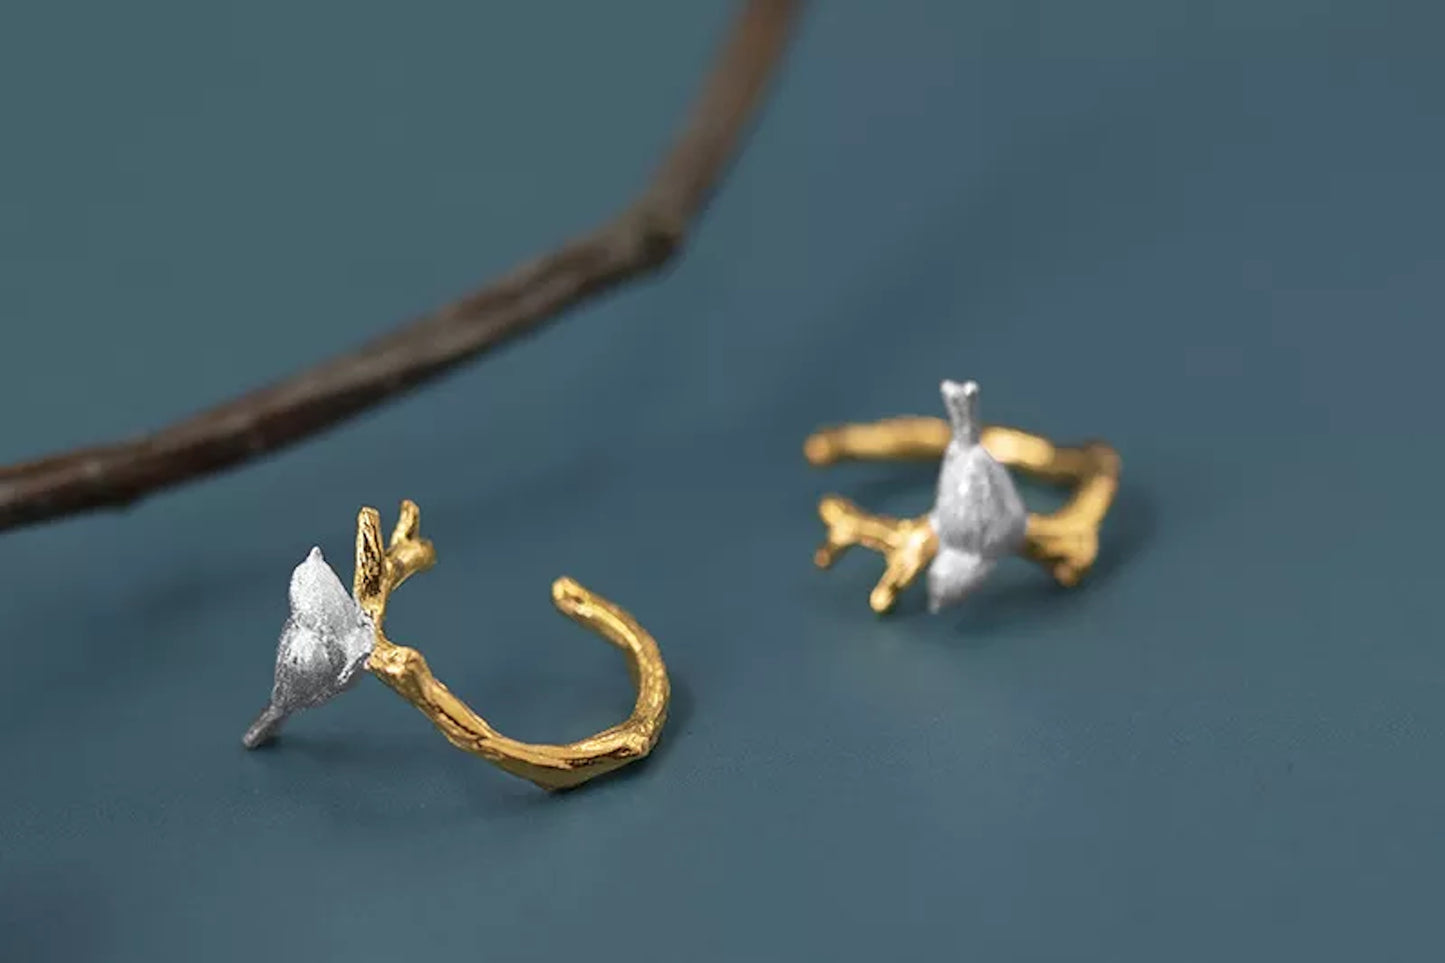 Special Edition: 925 Sterling Silver Bird Exquisite Advanced Sense No Ear Holes • 18K Gold Plated • Unique Small Group Design • High-Quality Jewelry